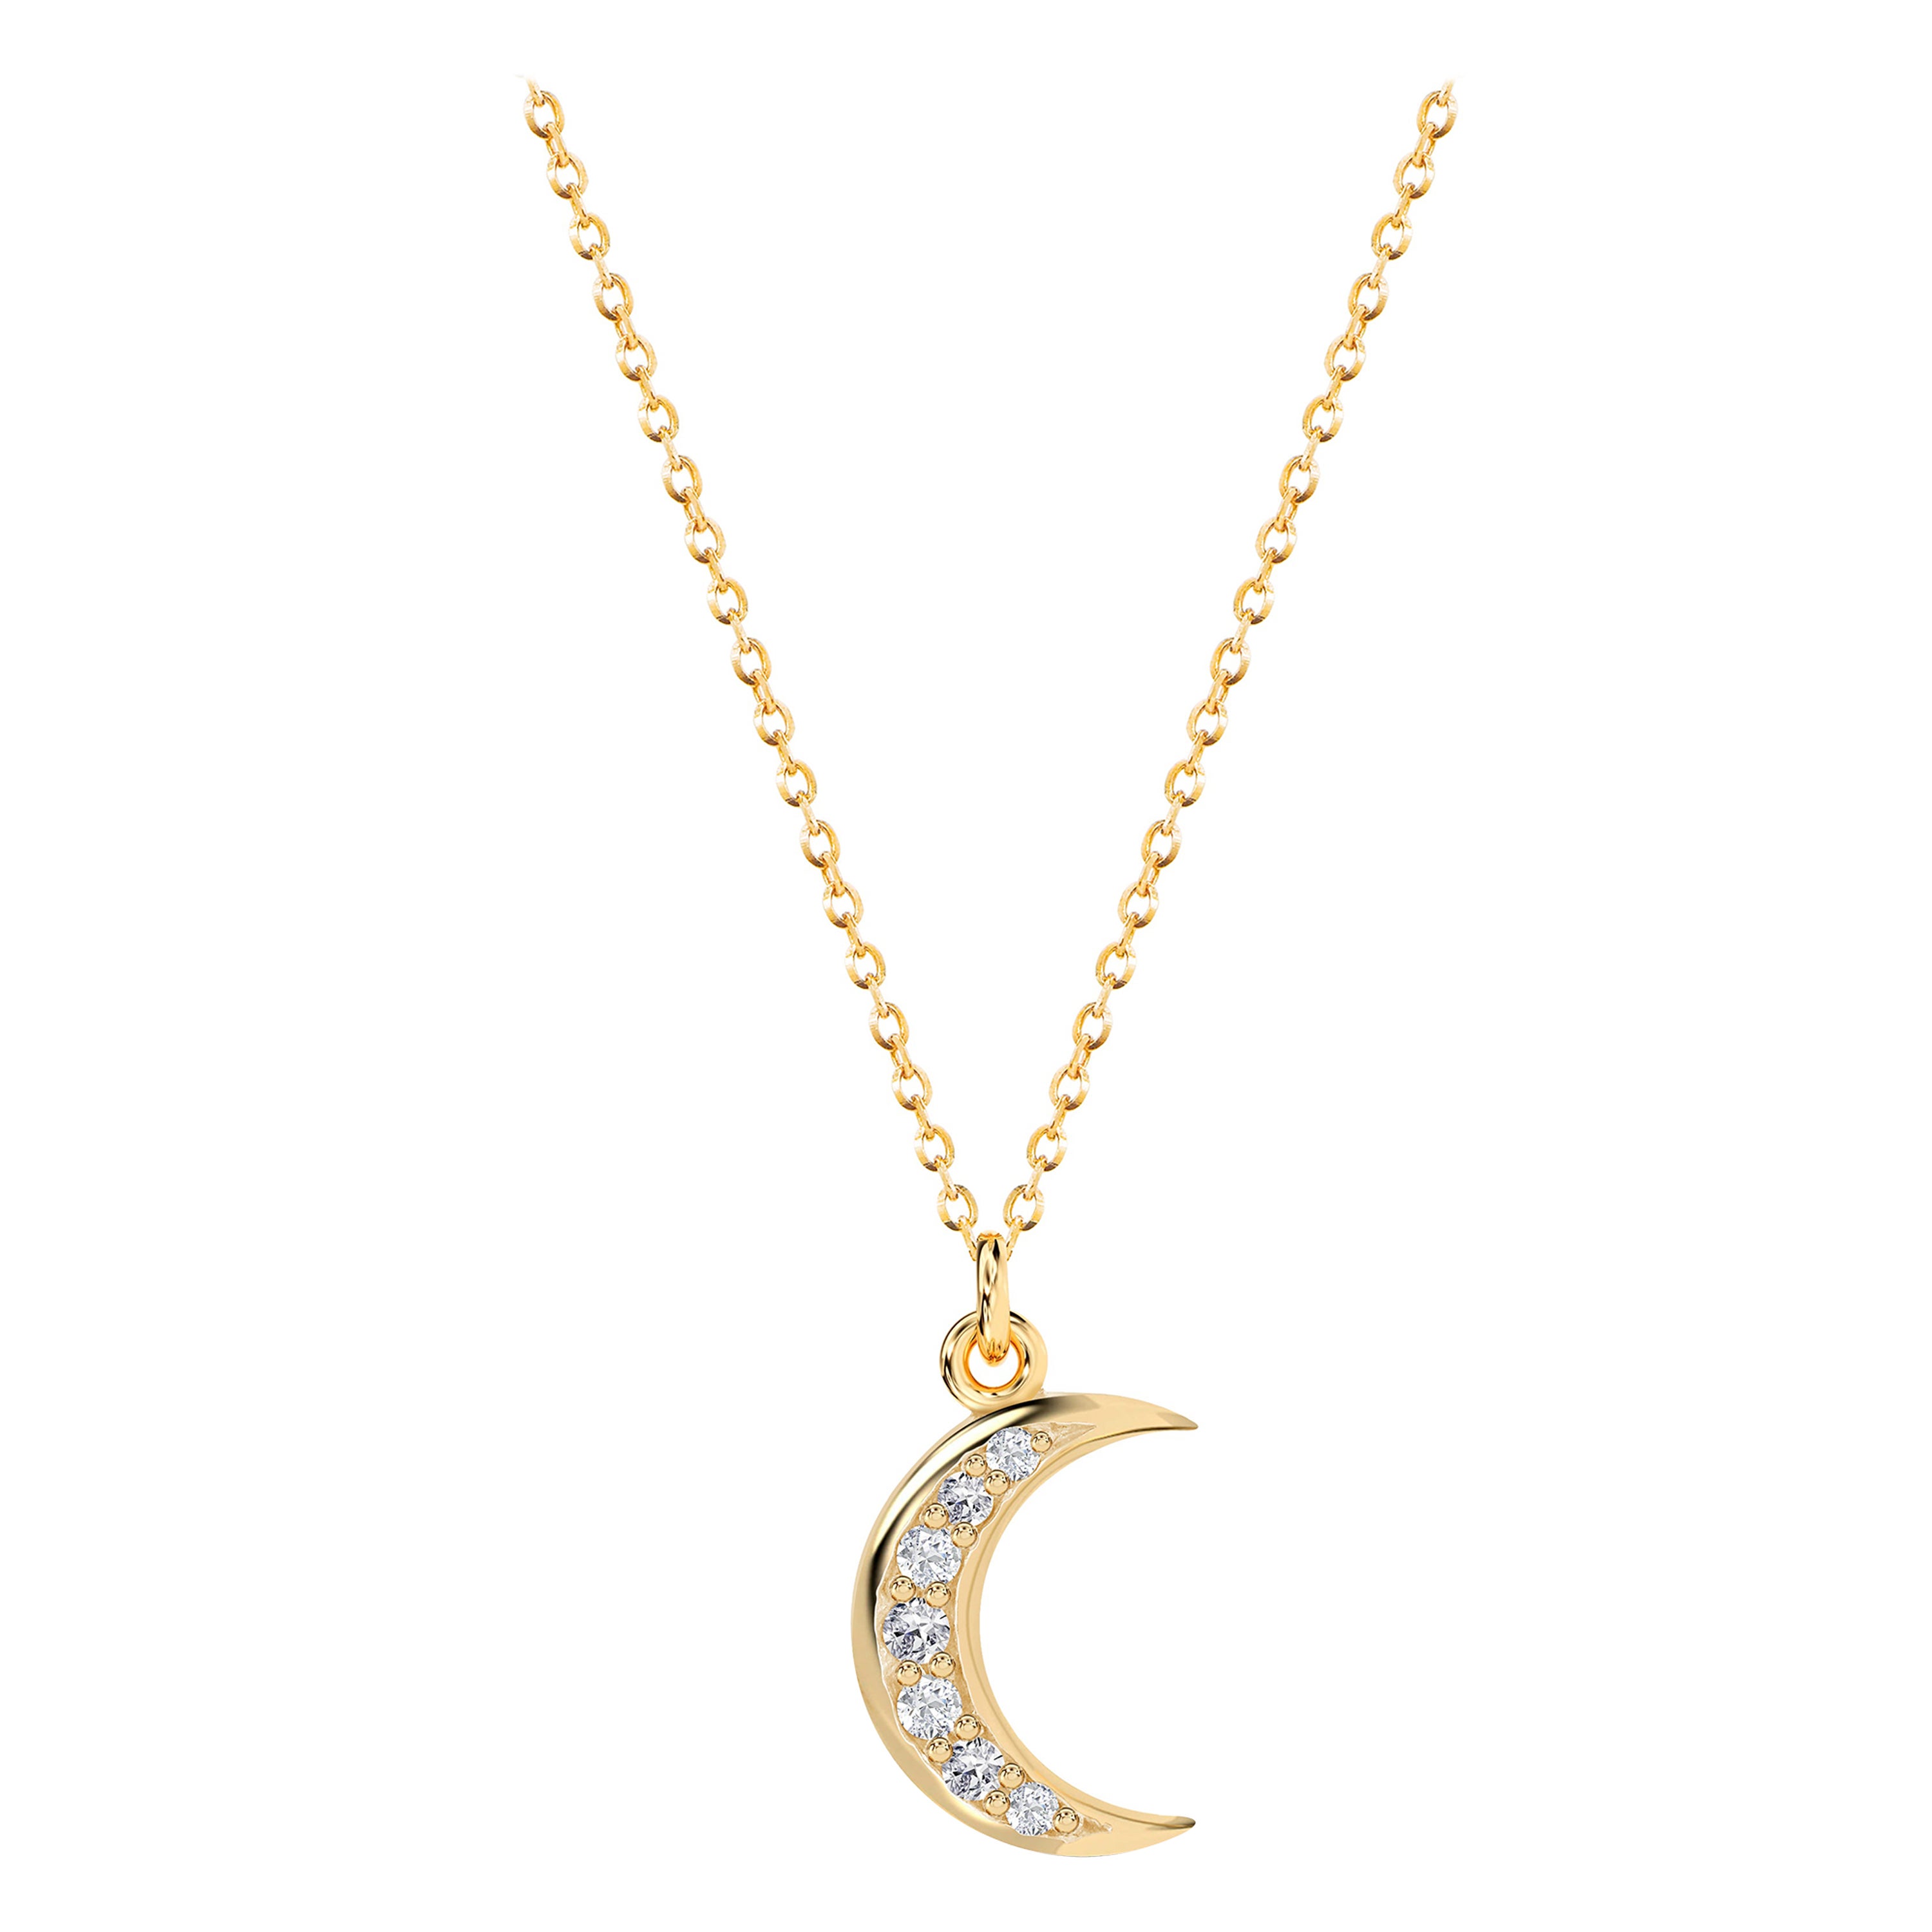 0.05 Ct Diamond Crescent Moon Necklace in 14K Gold